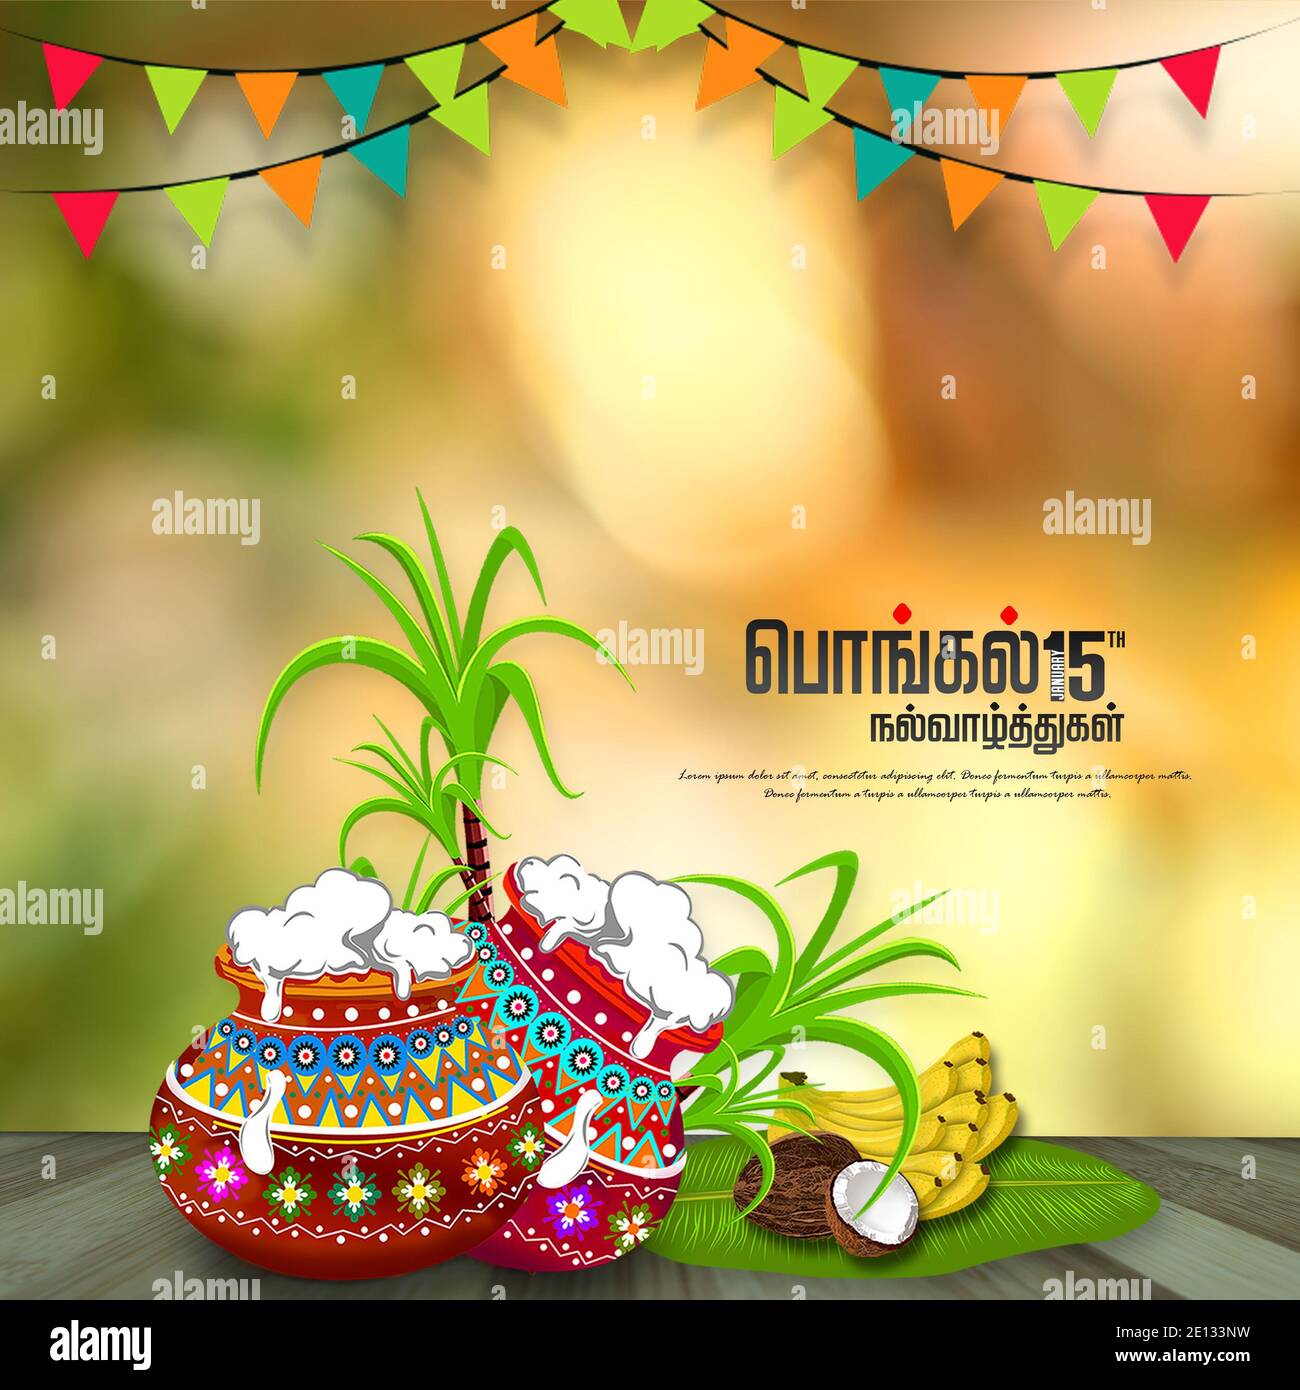 Happy Pongal Background Template Design - Pongal Festival ...